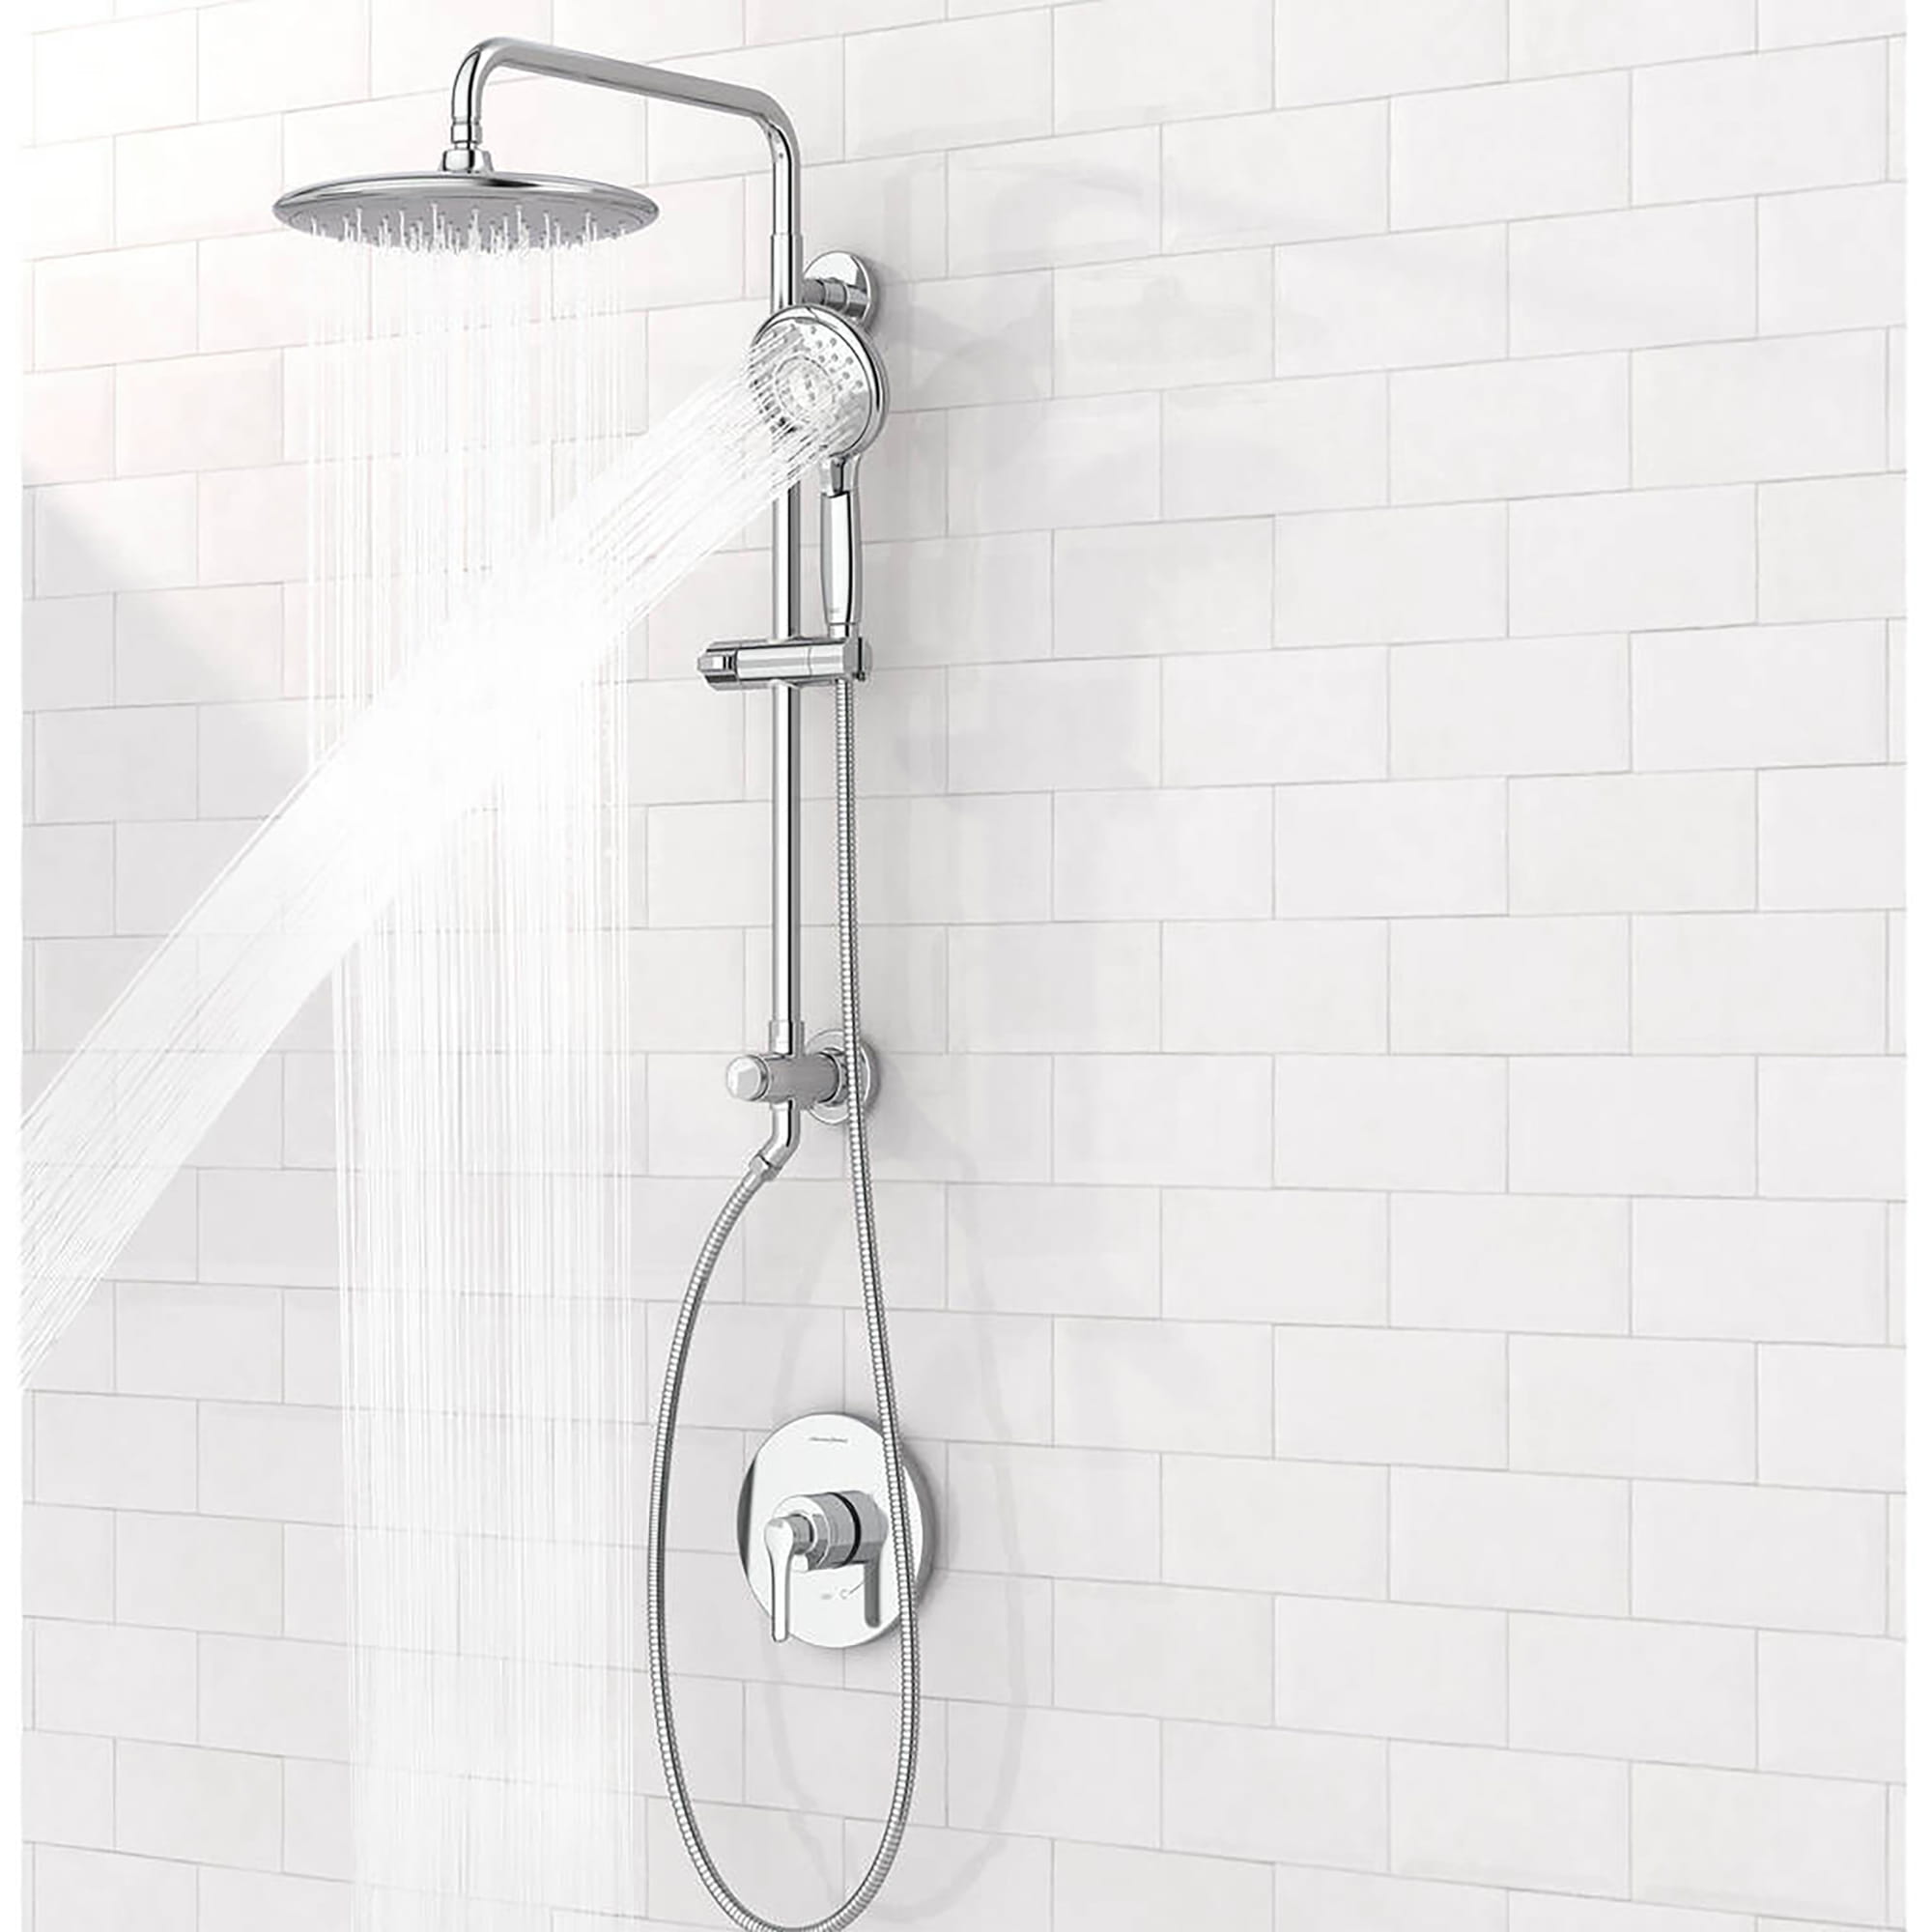 Spectra Versa 24 Inch 4 Function 18 gpm 68 L min Shower System With Rain Showerhead CHROME